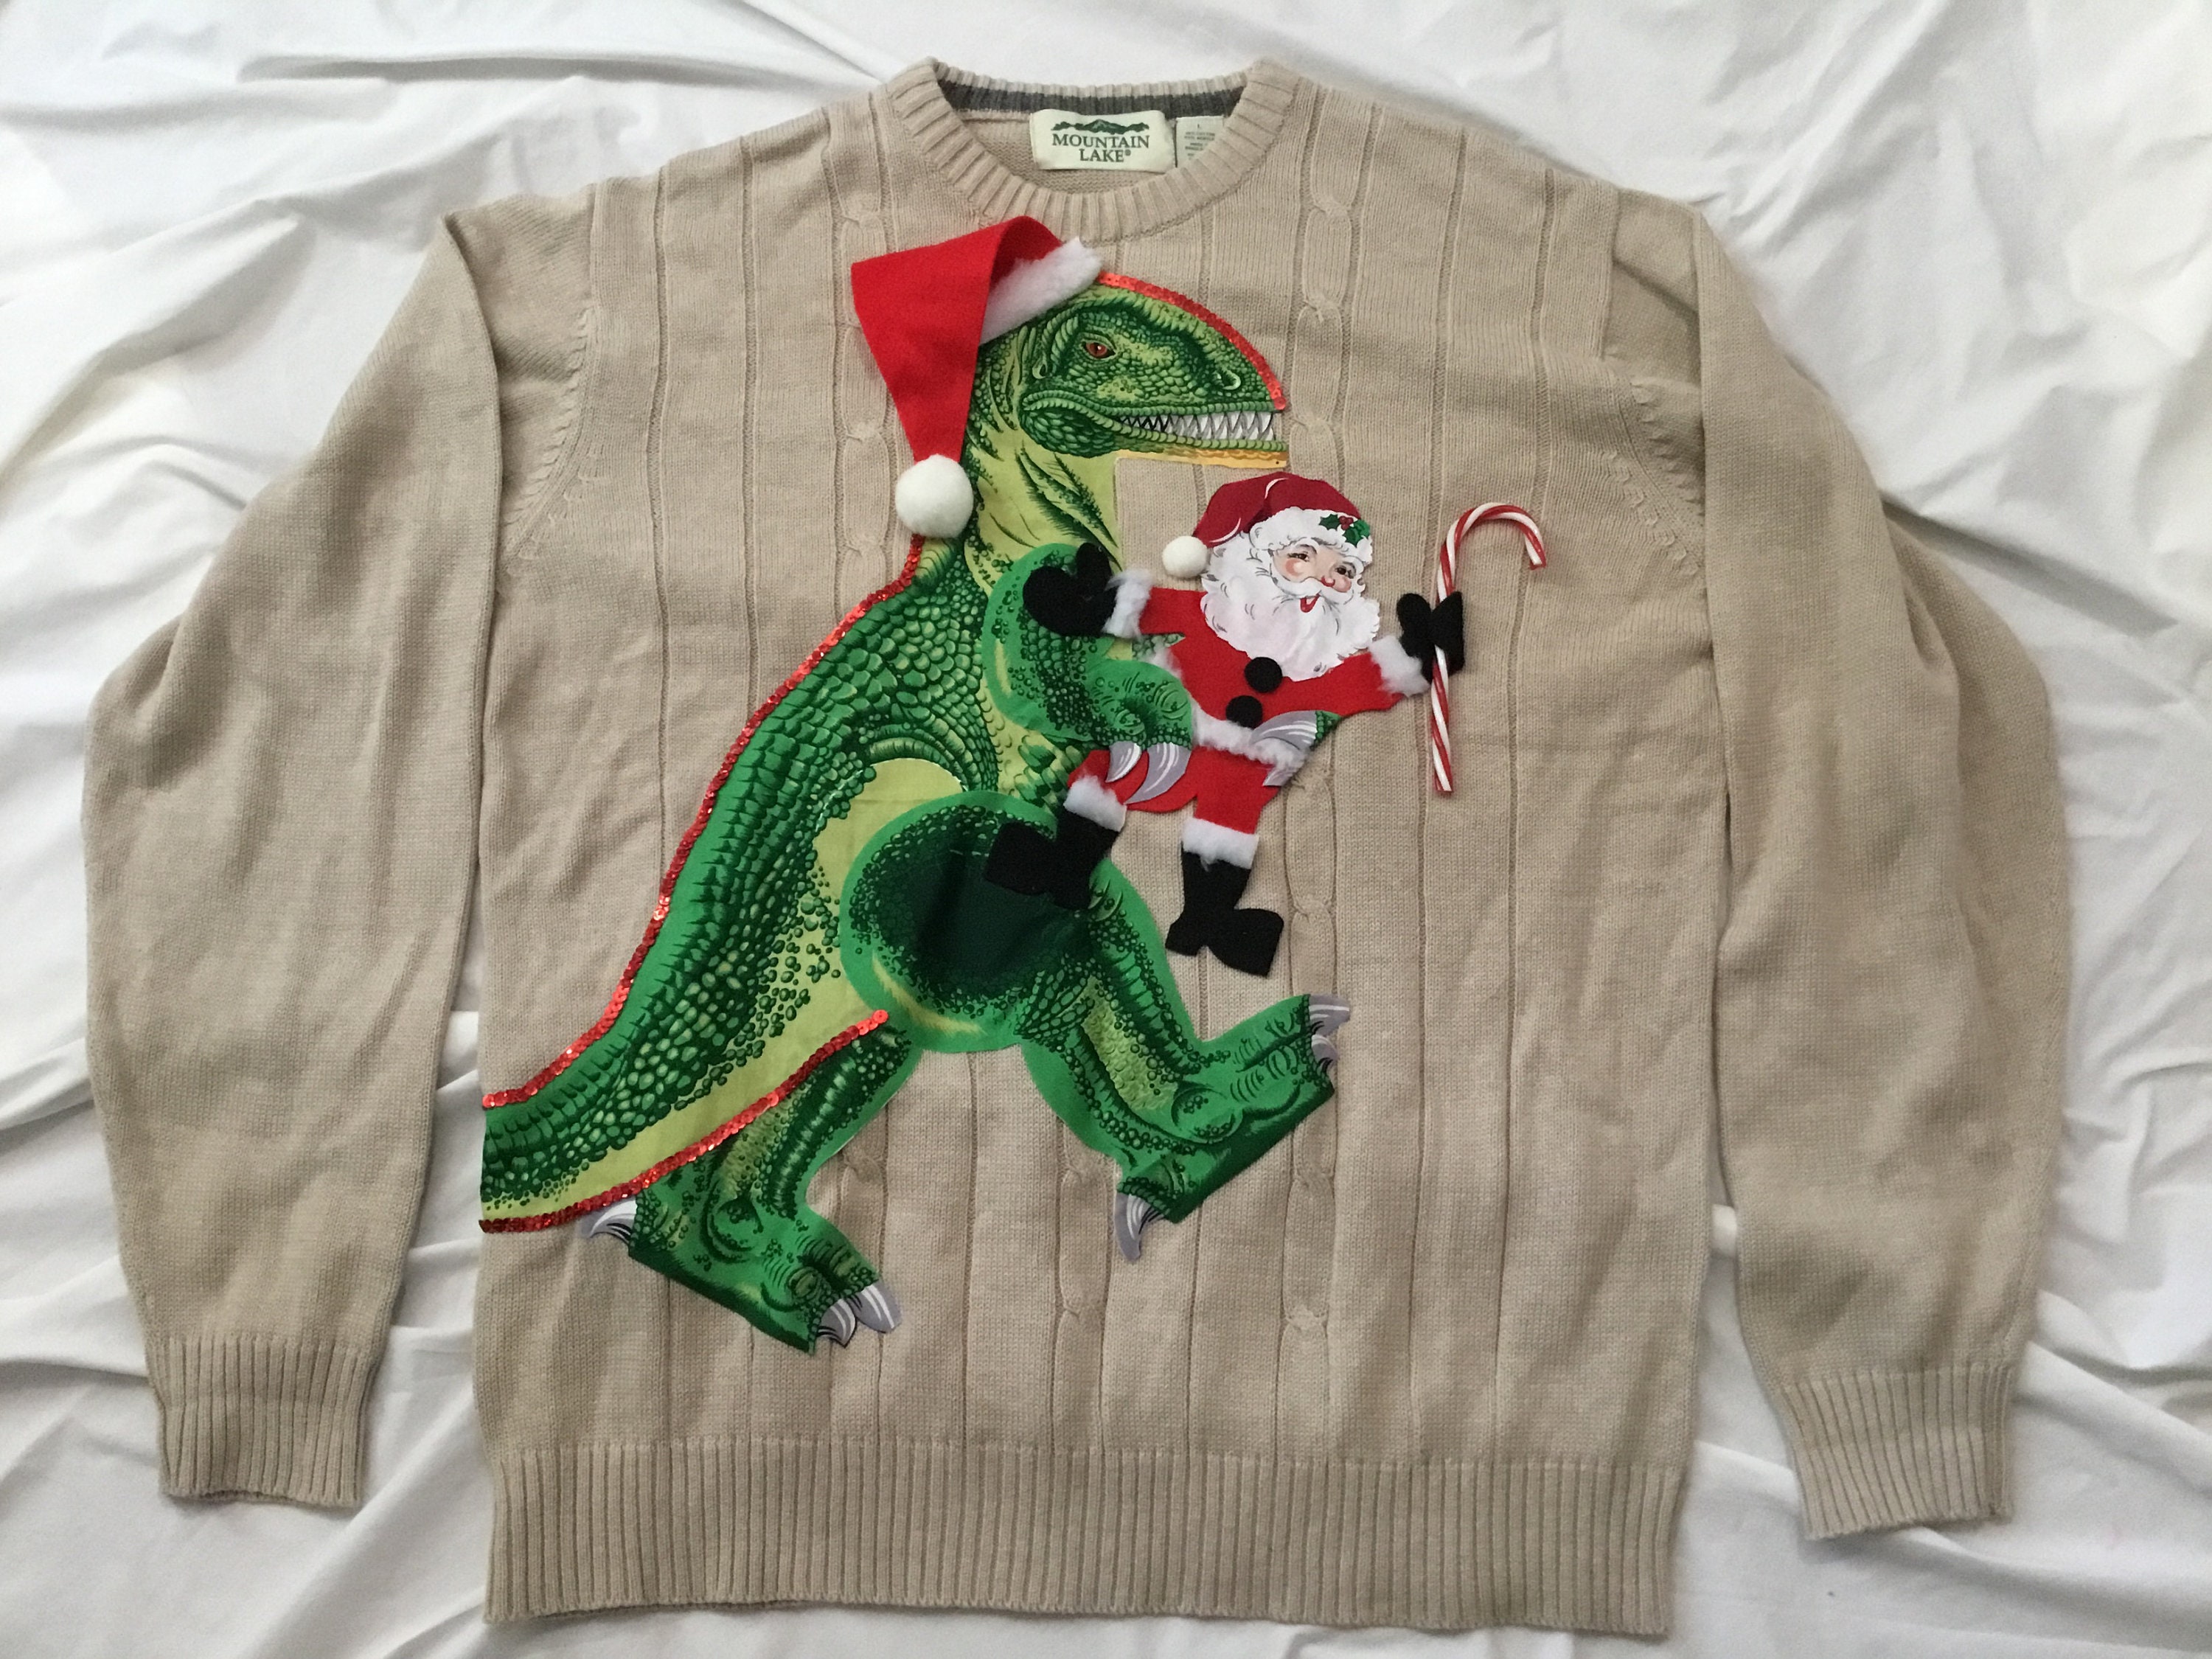 3D T-Rex Ugly Christmas Sweater - Costume Agent - T-Rex Plush Sweater